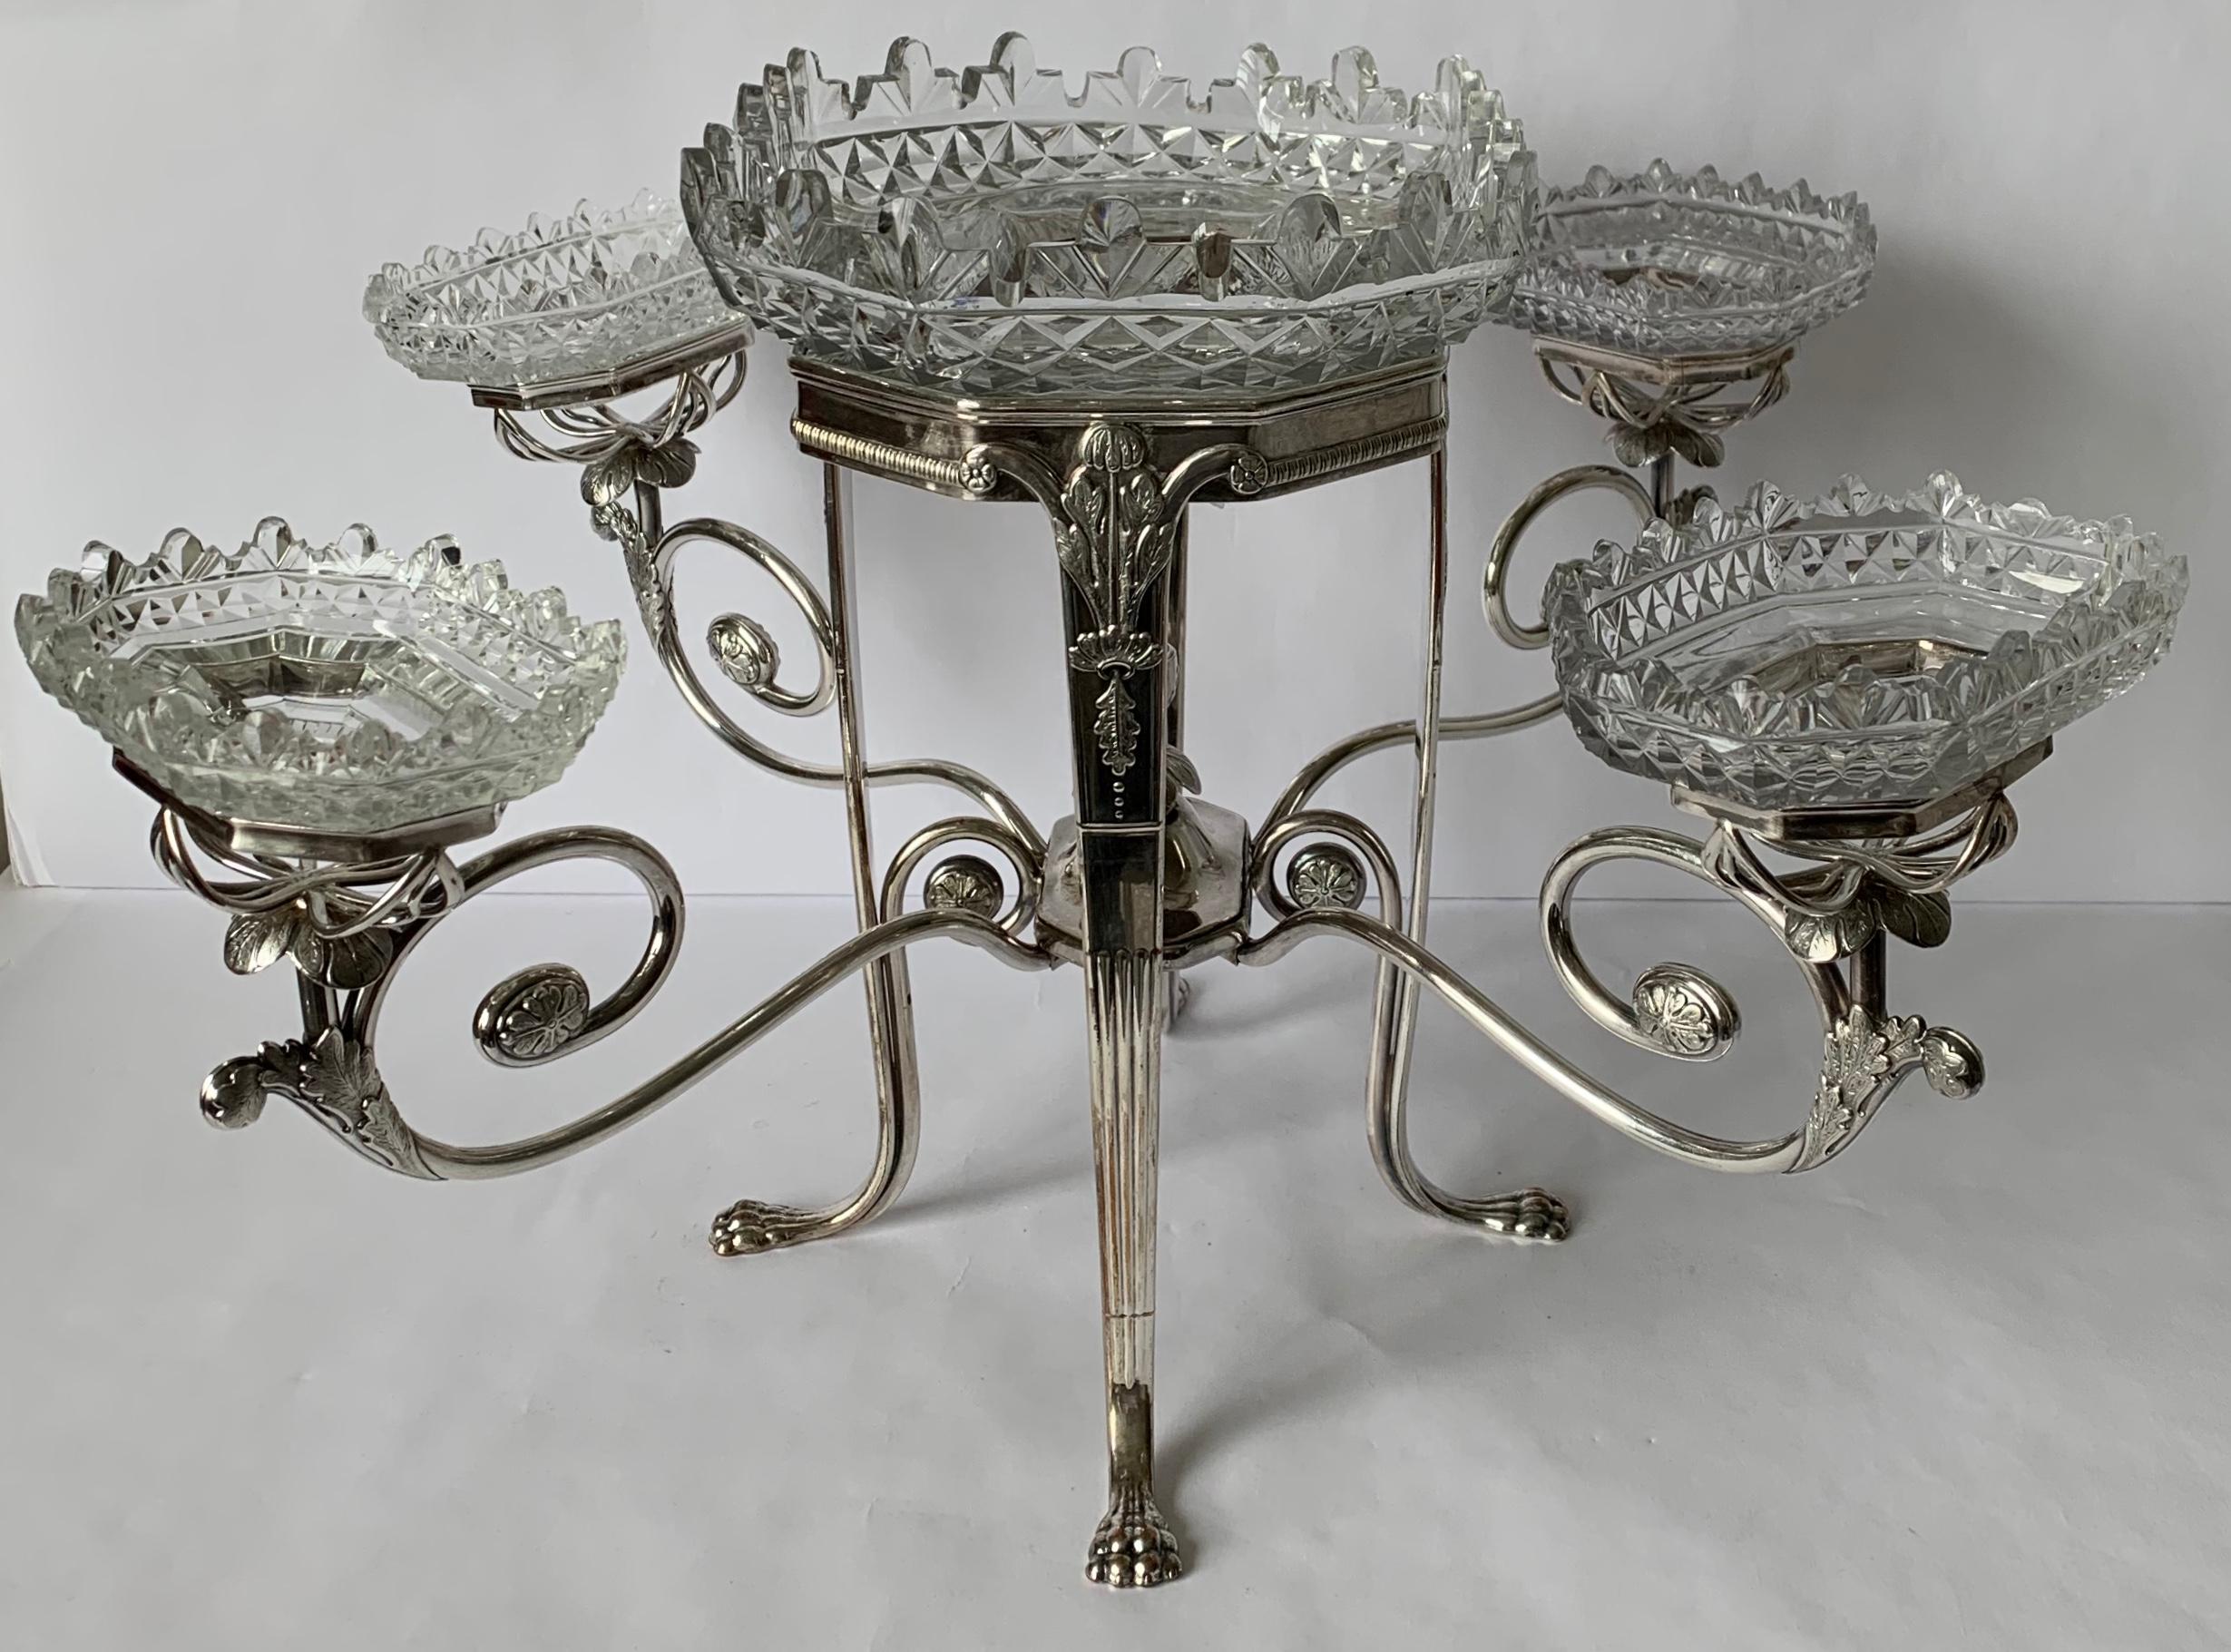 Antique English Silver Plated and Cut Glass Epergne For Sale 9